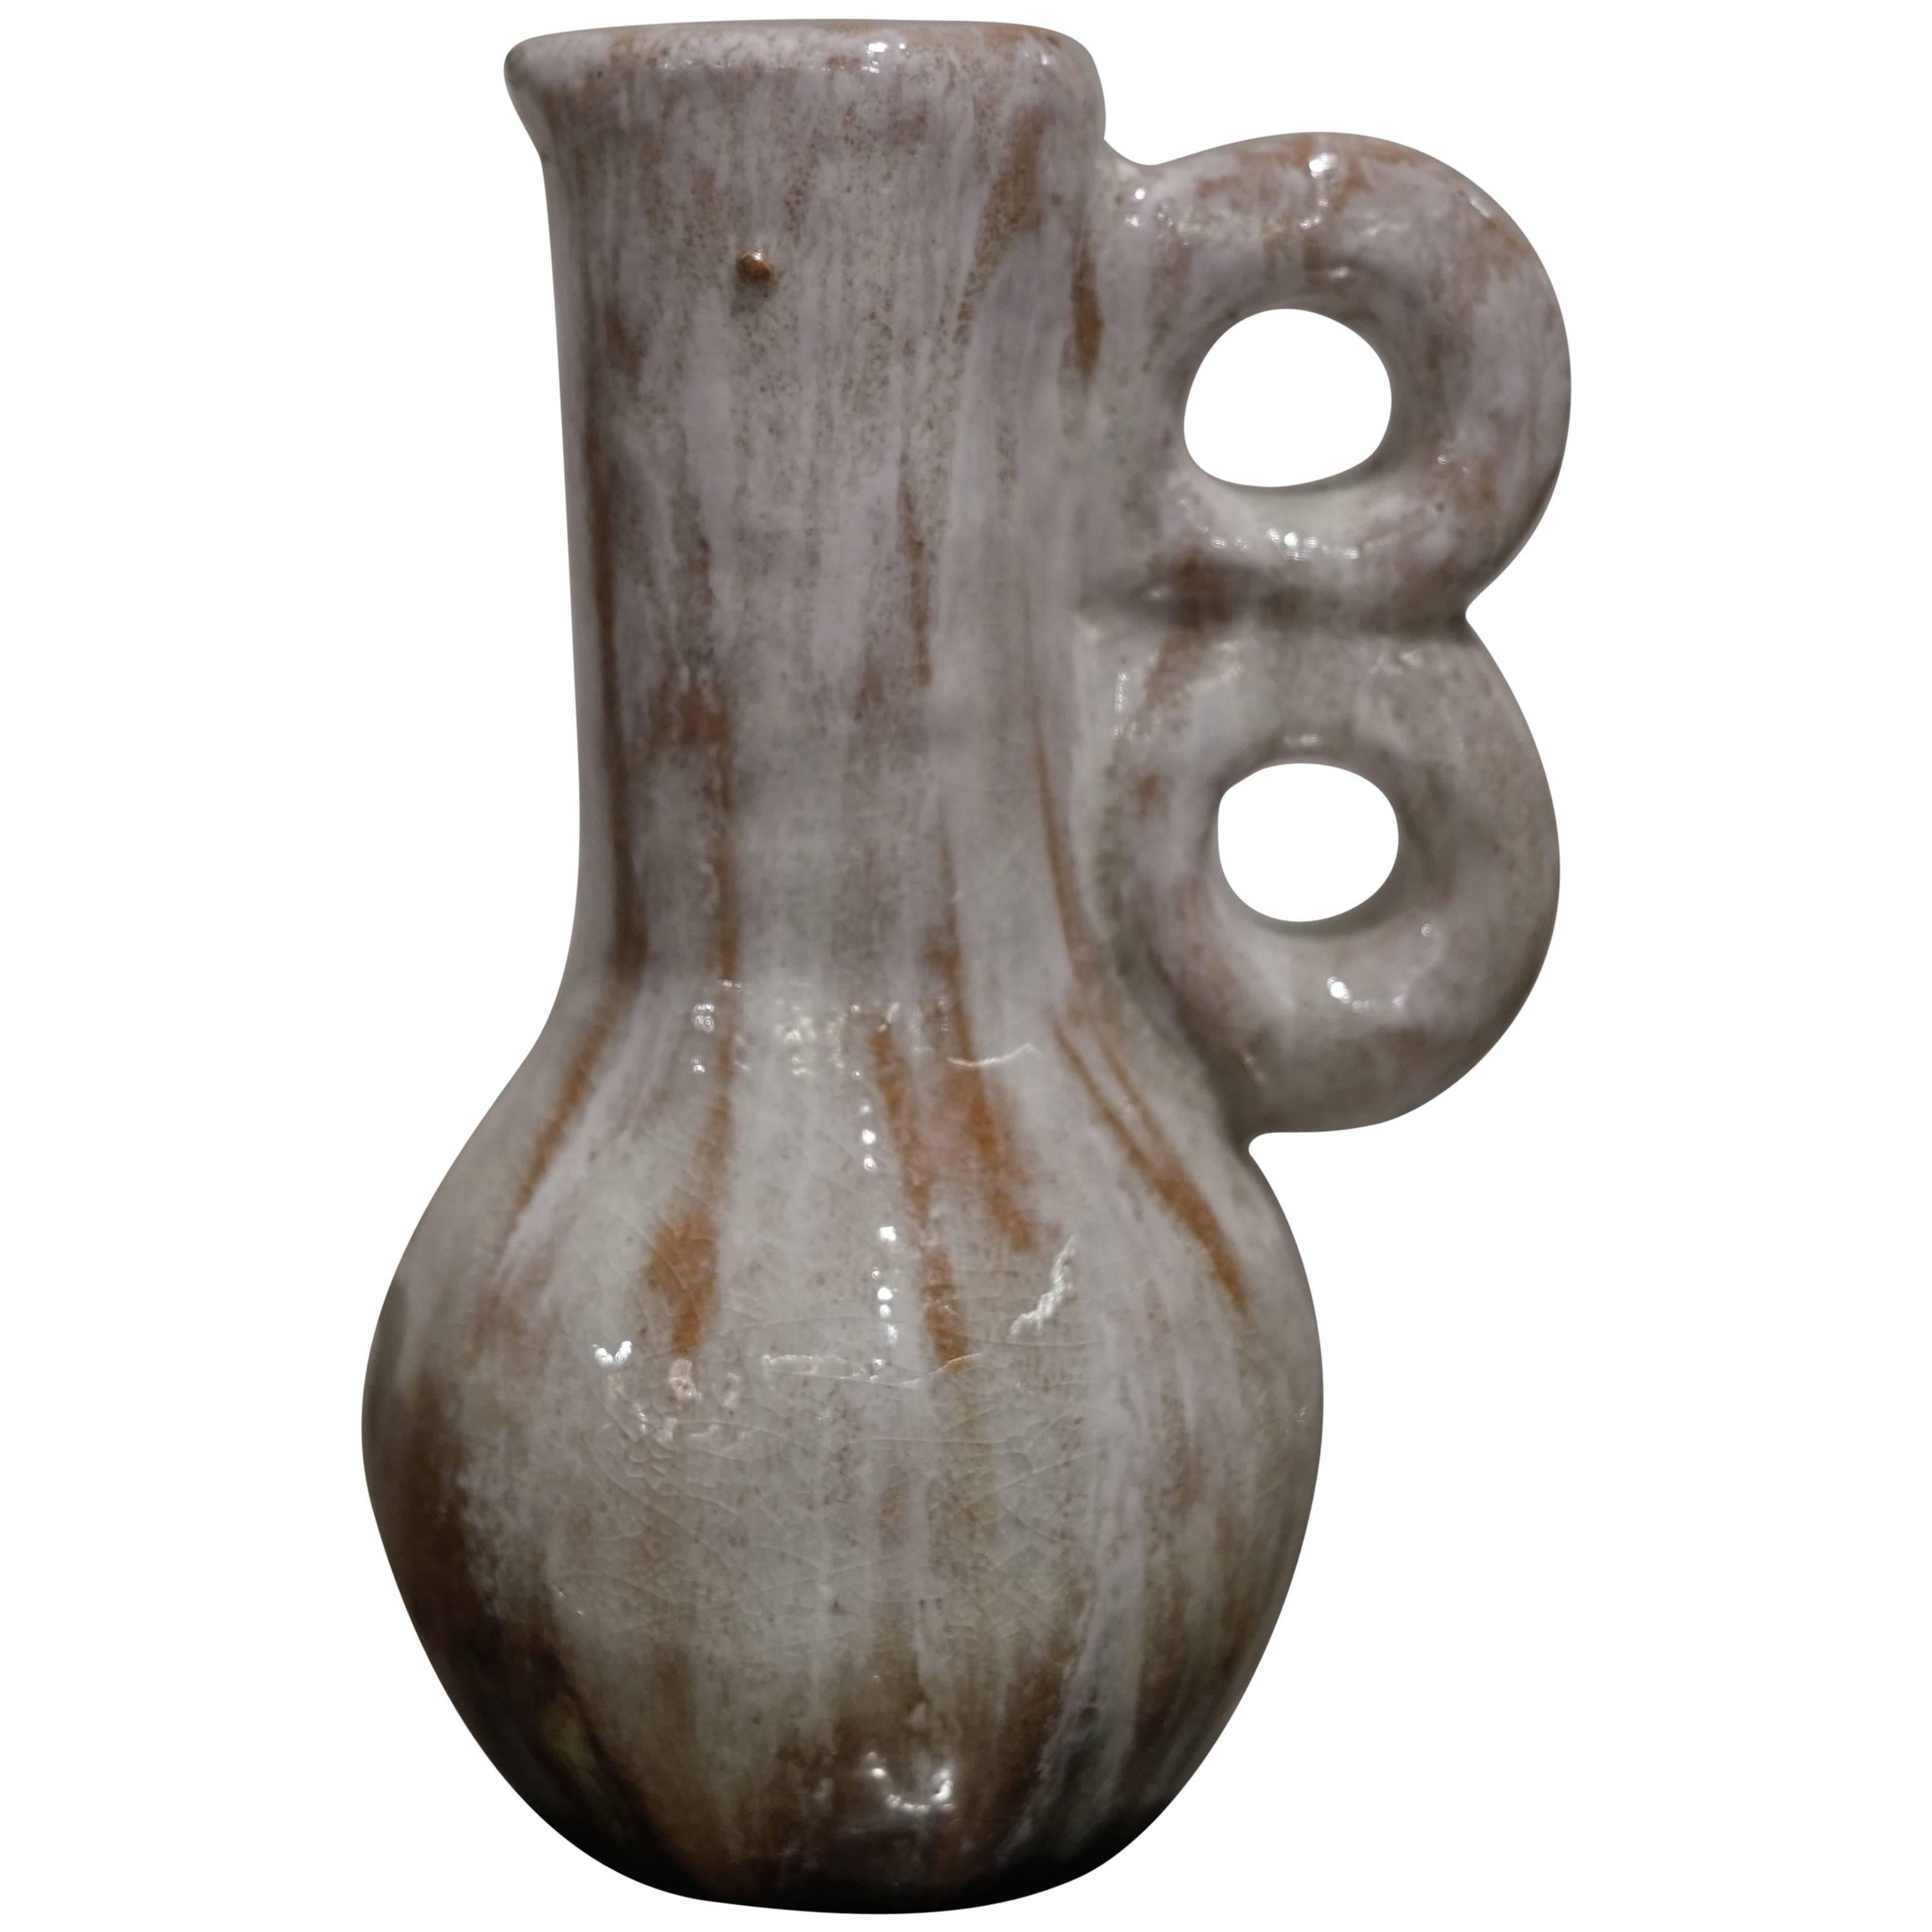 Glazed Ceramic Pitcher or Jug by Alice Colonieu, Made in France, circa 1950 For Sale